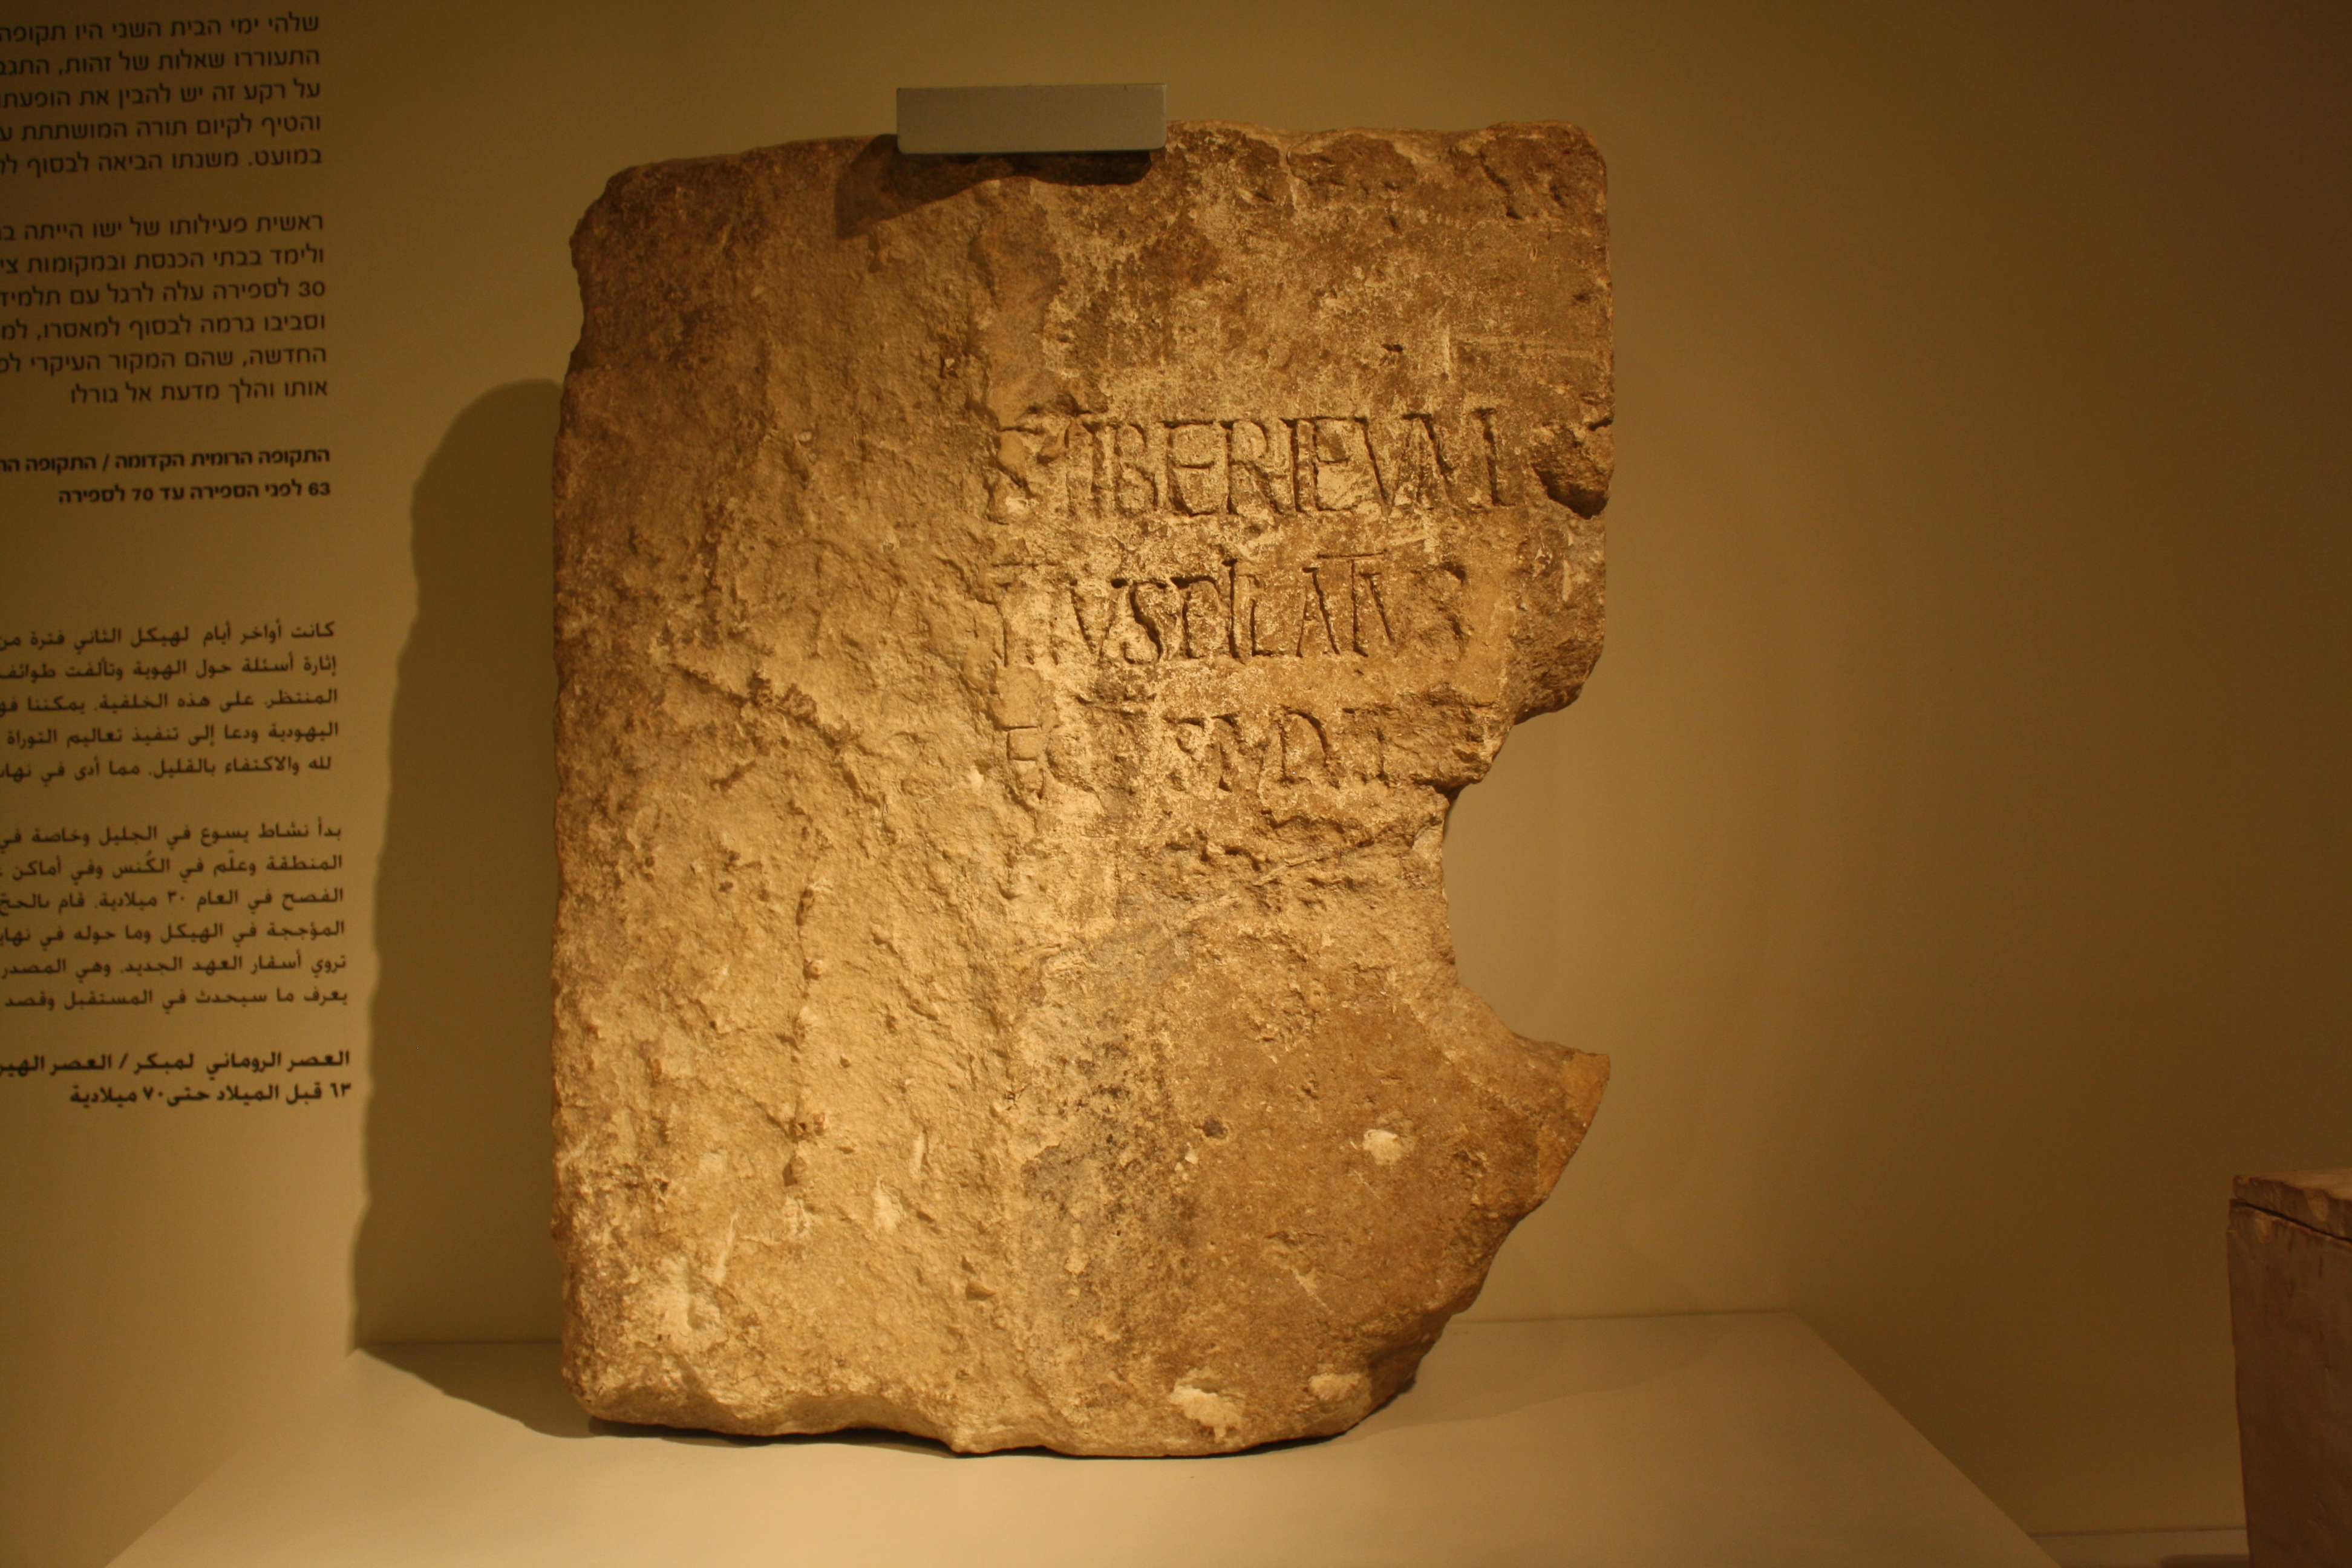 https://upload.wikimedia.org/wikipedia/commons/a/af/Pontius_Pilate_Inscription.JPG